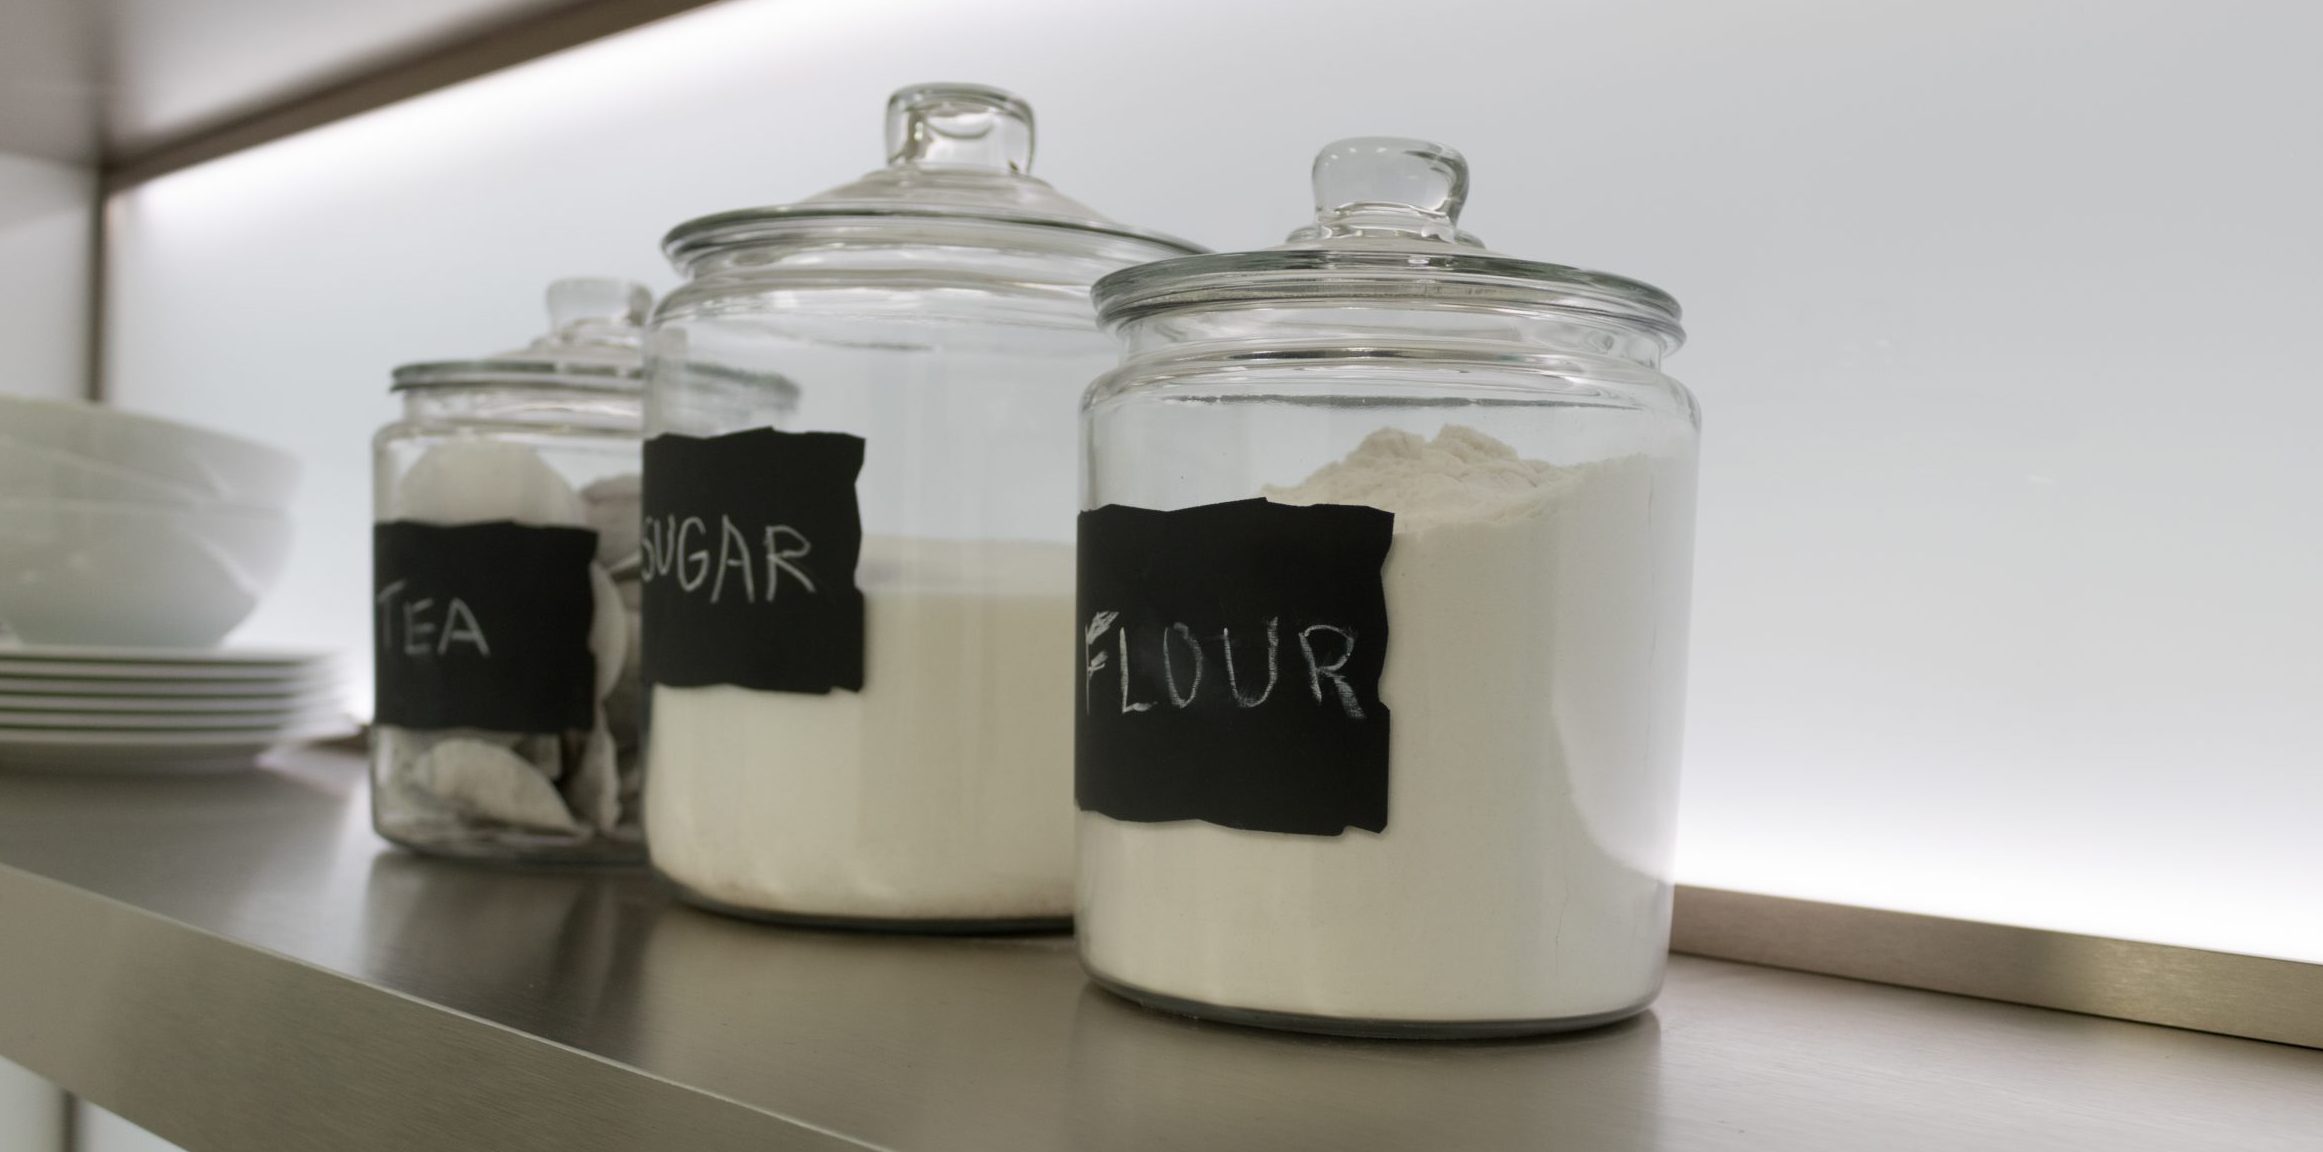 Flour and Sugar Canisters You Can Make Yourself - Cleverly Simple